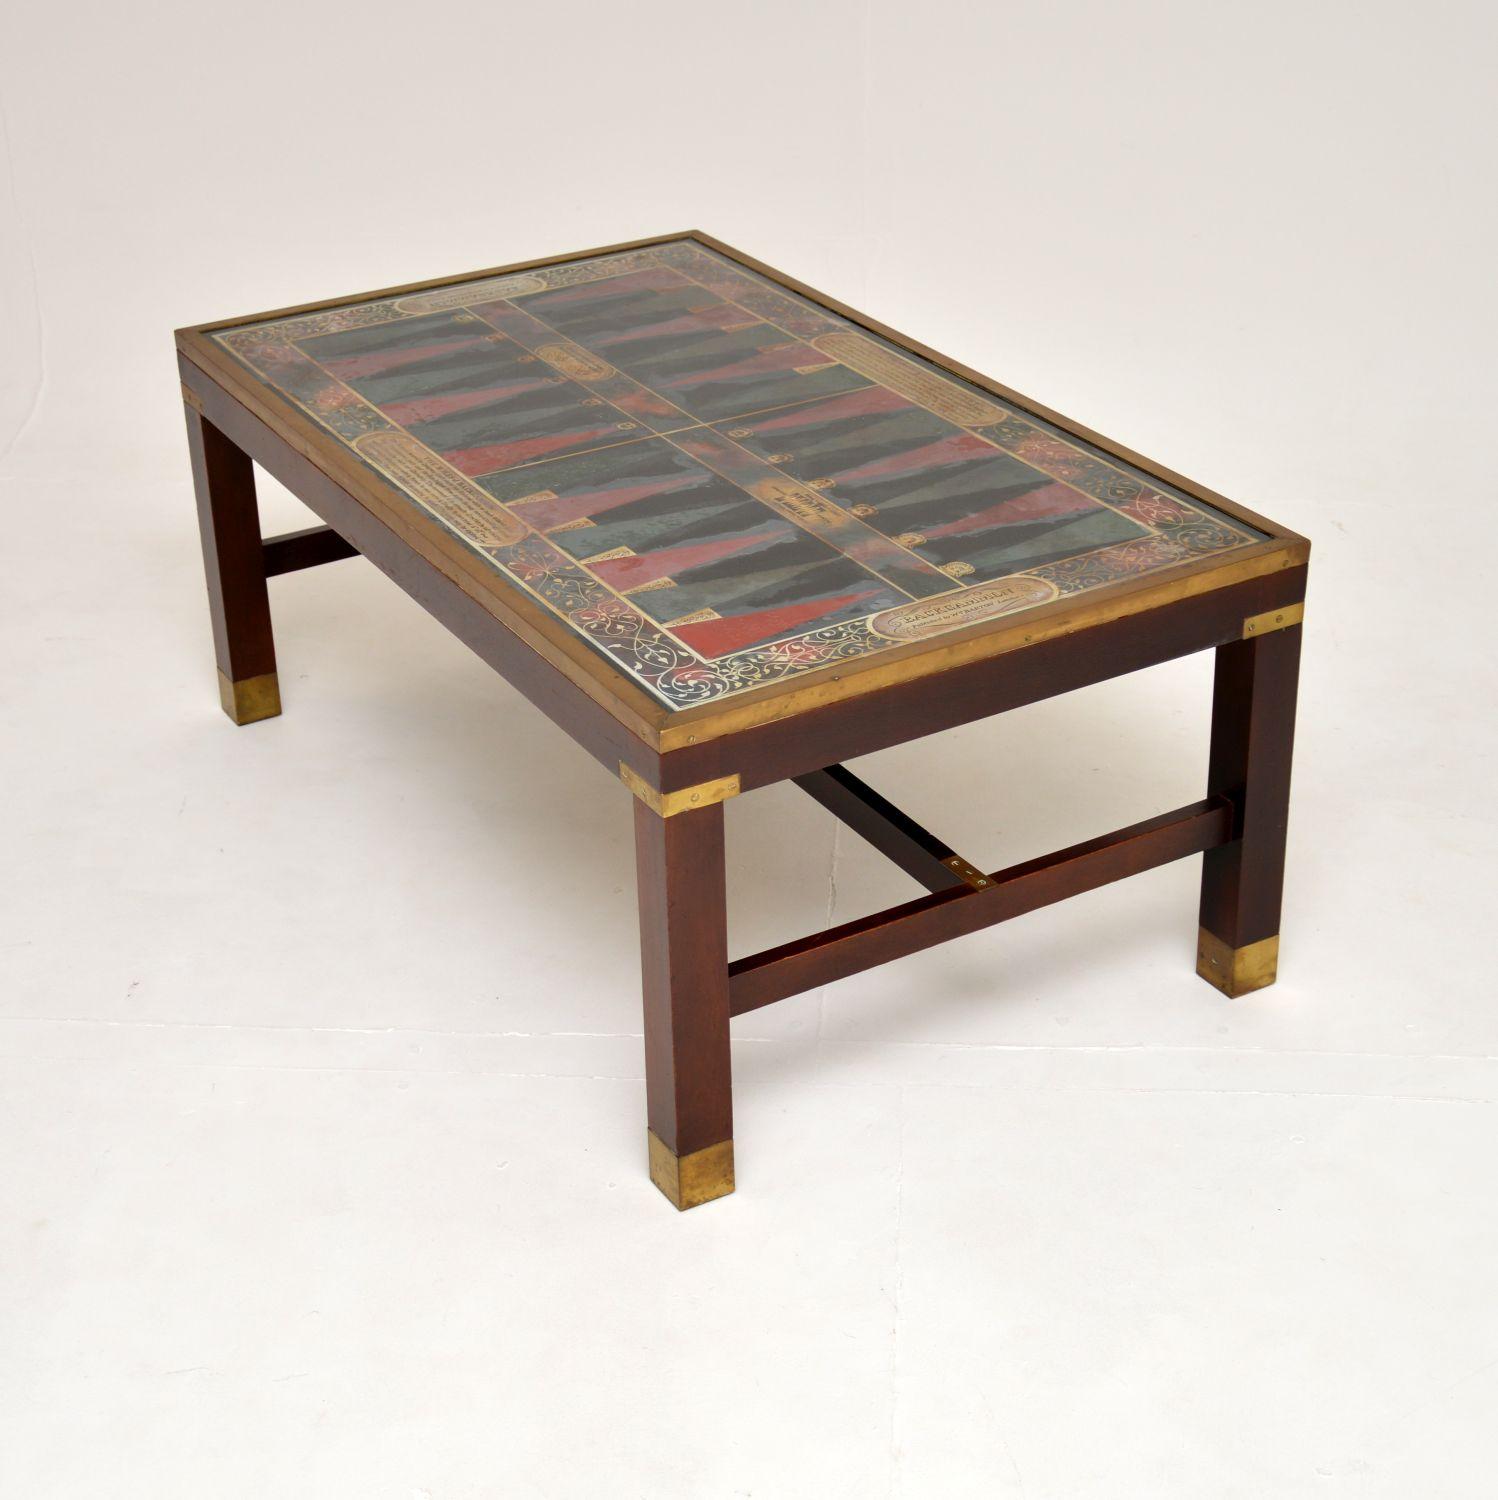 Campaign Antique Military Style Coffee Table with Backgammon Board